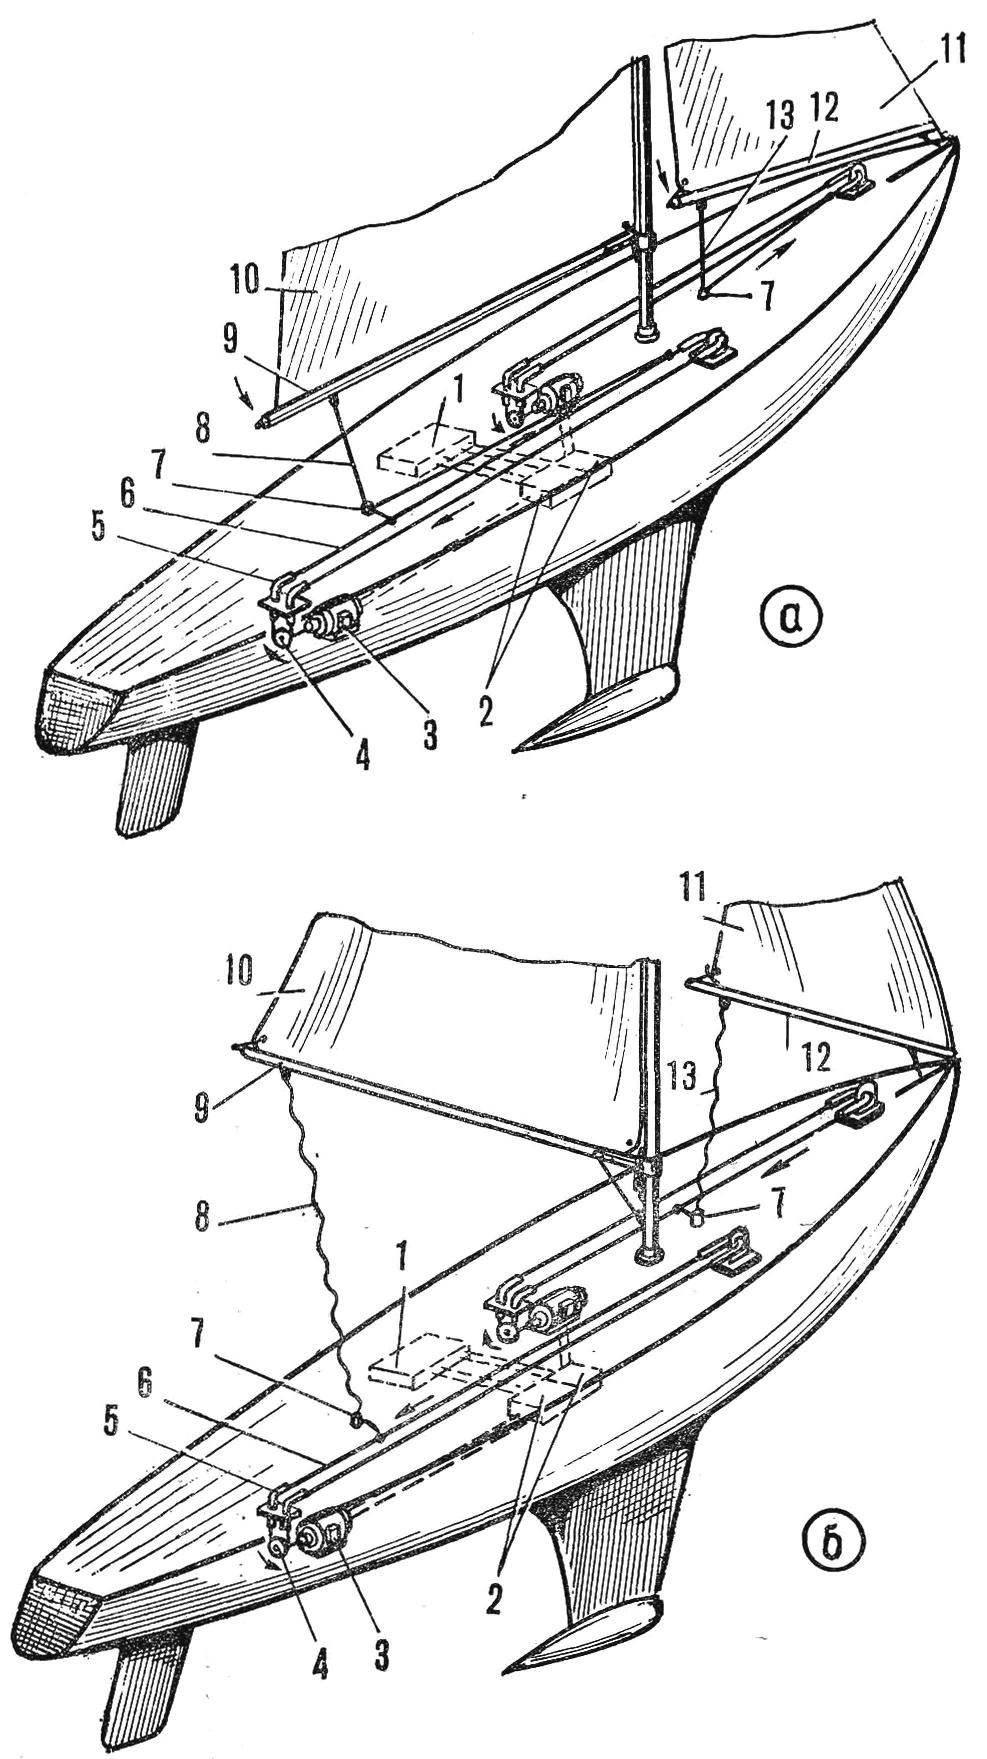 Fig. 5. The second option control the sails